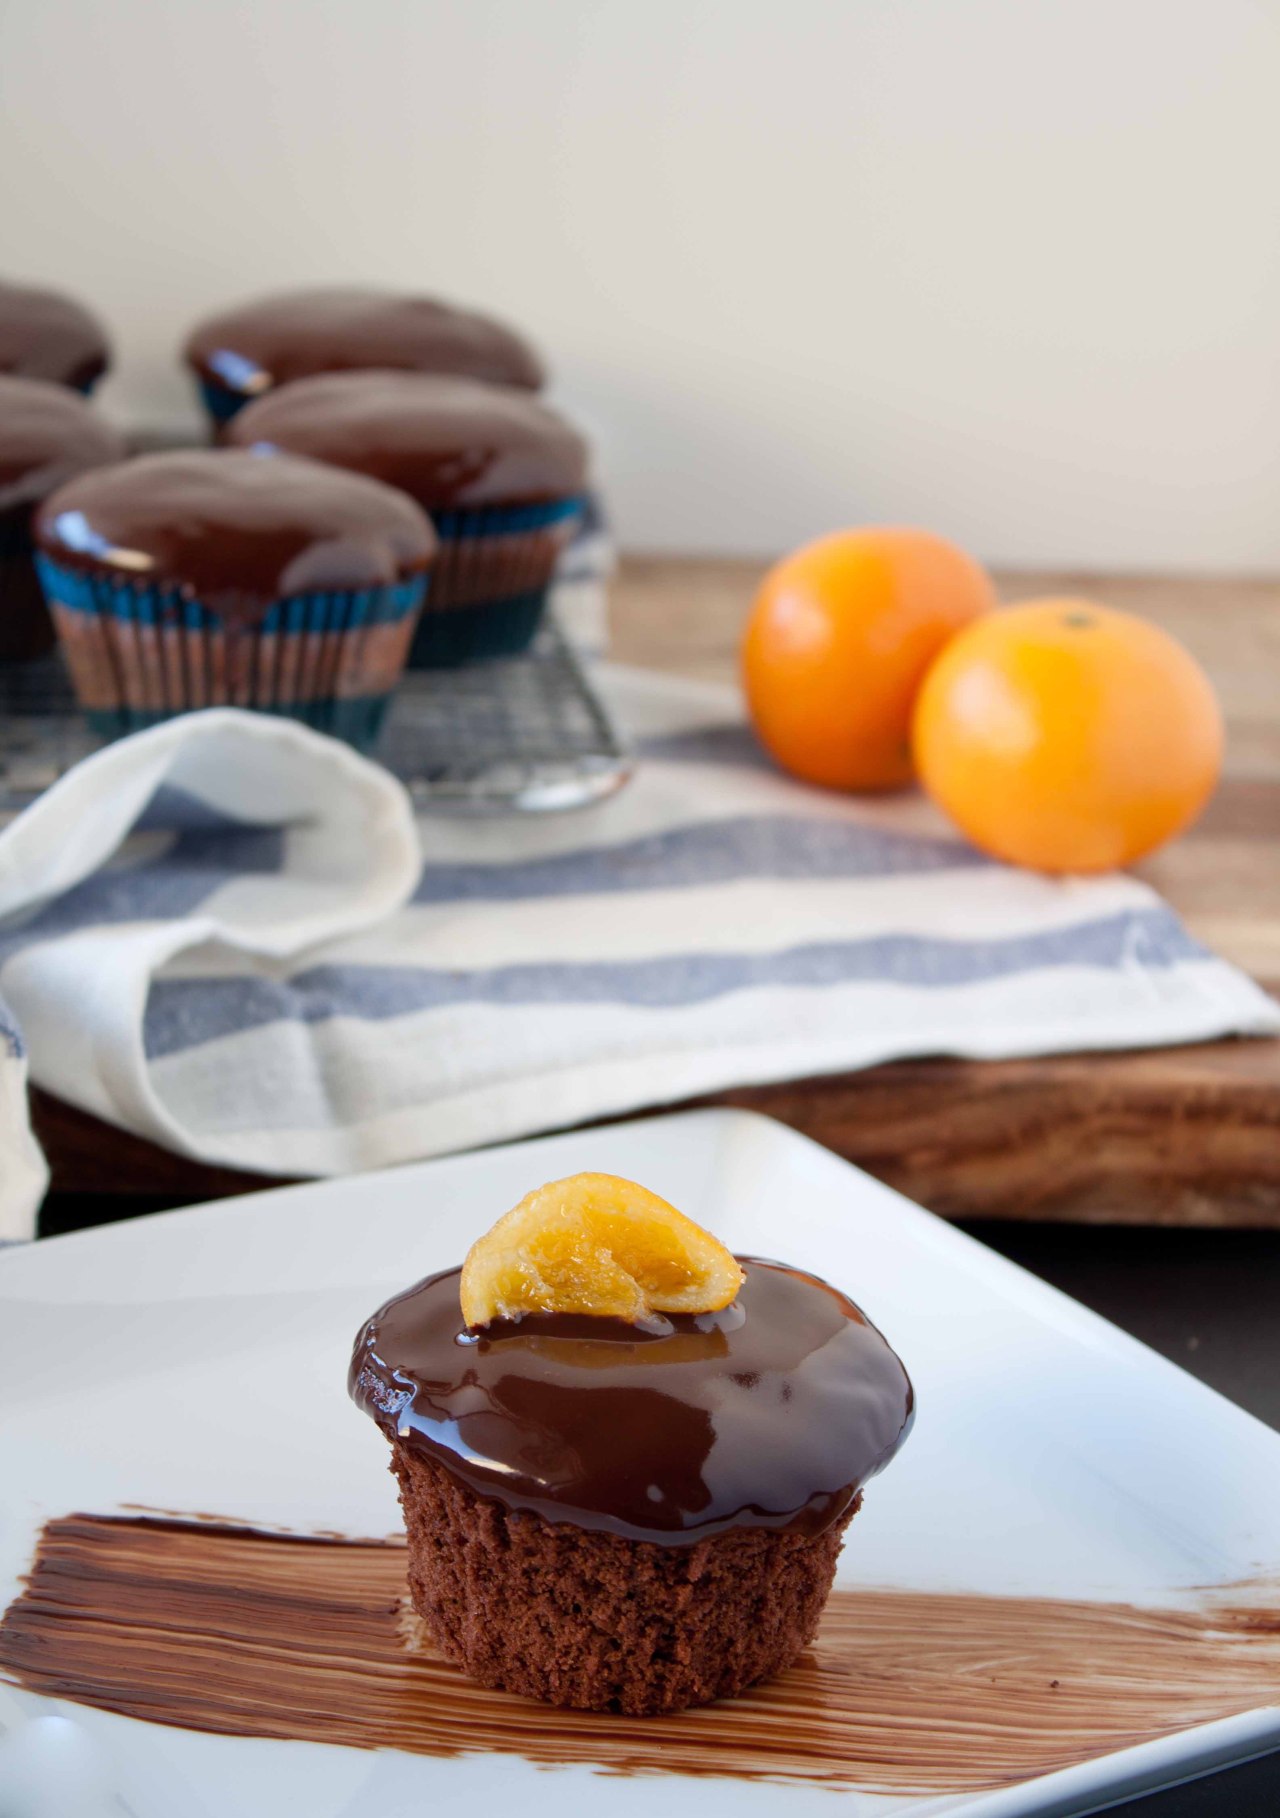 Chocolate Clementine Cupcake with Candied Citrus Slices